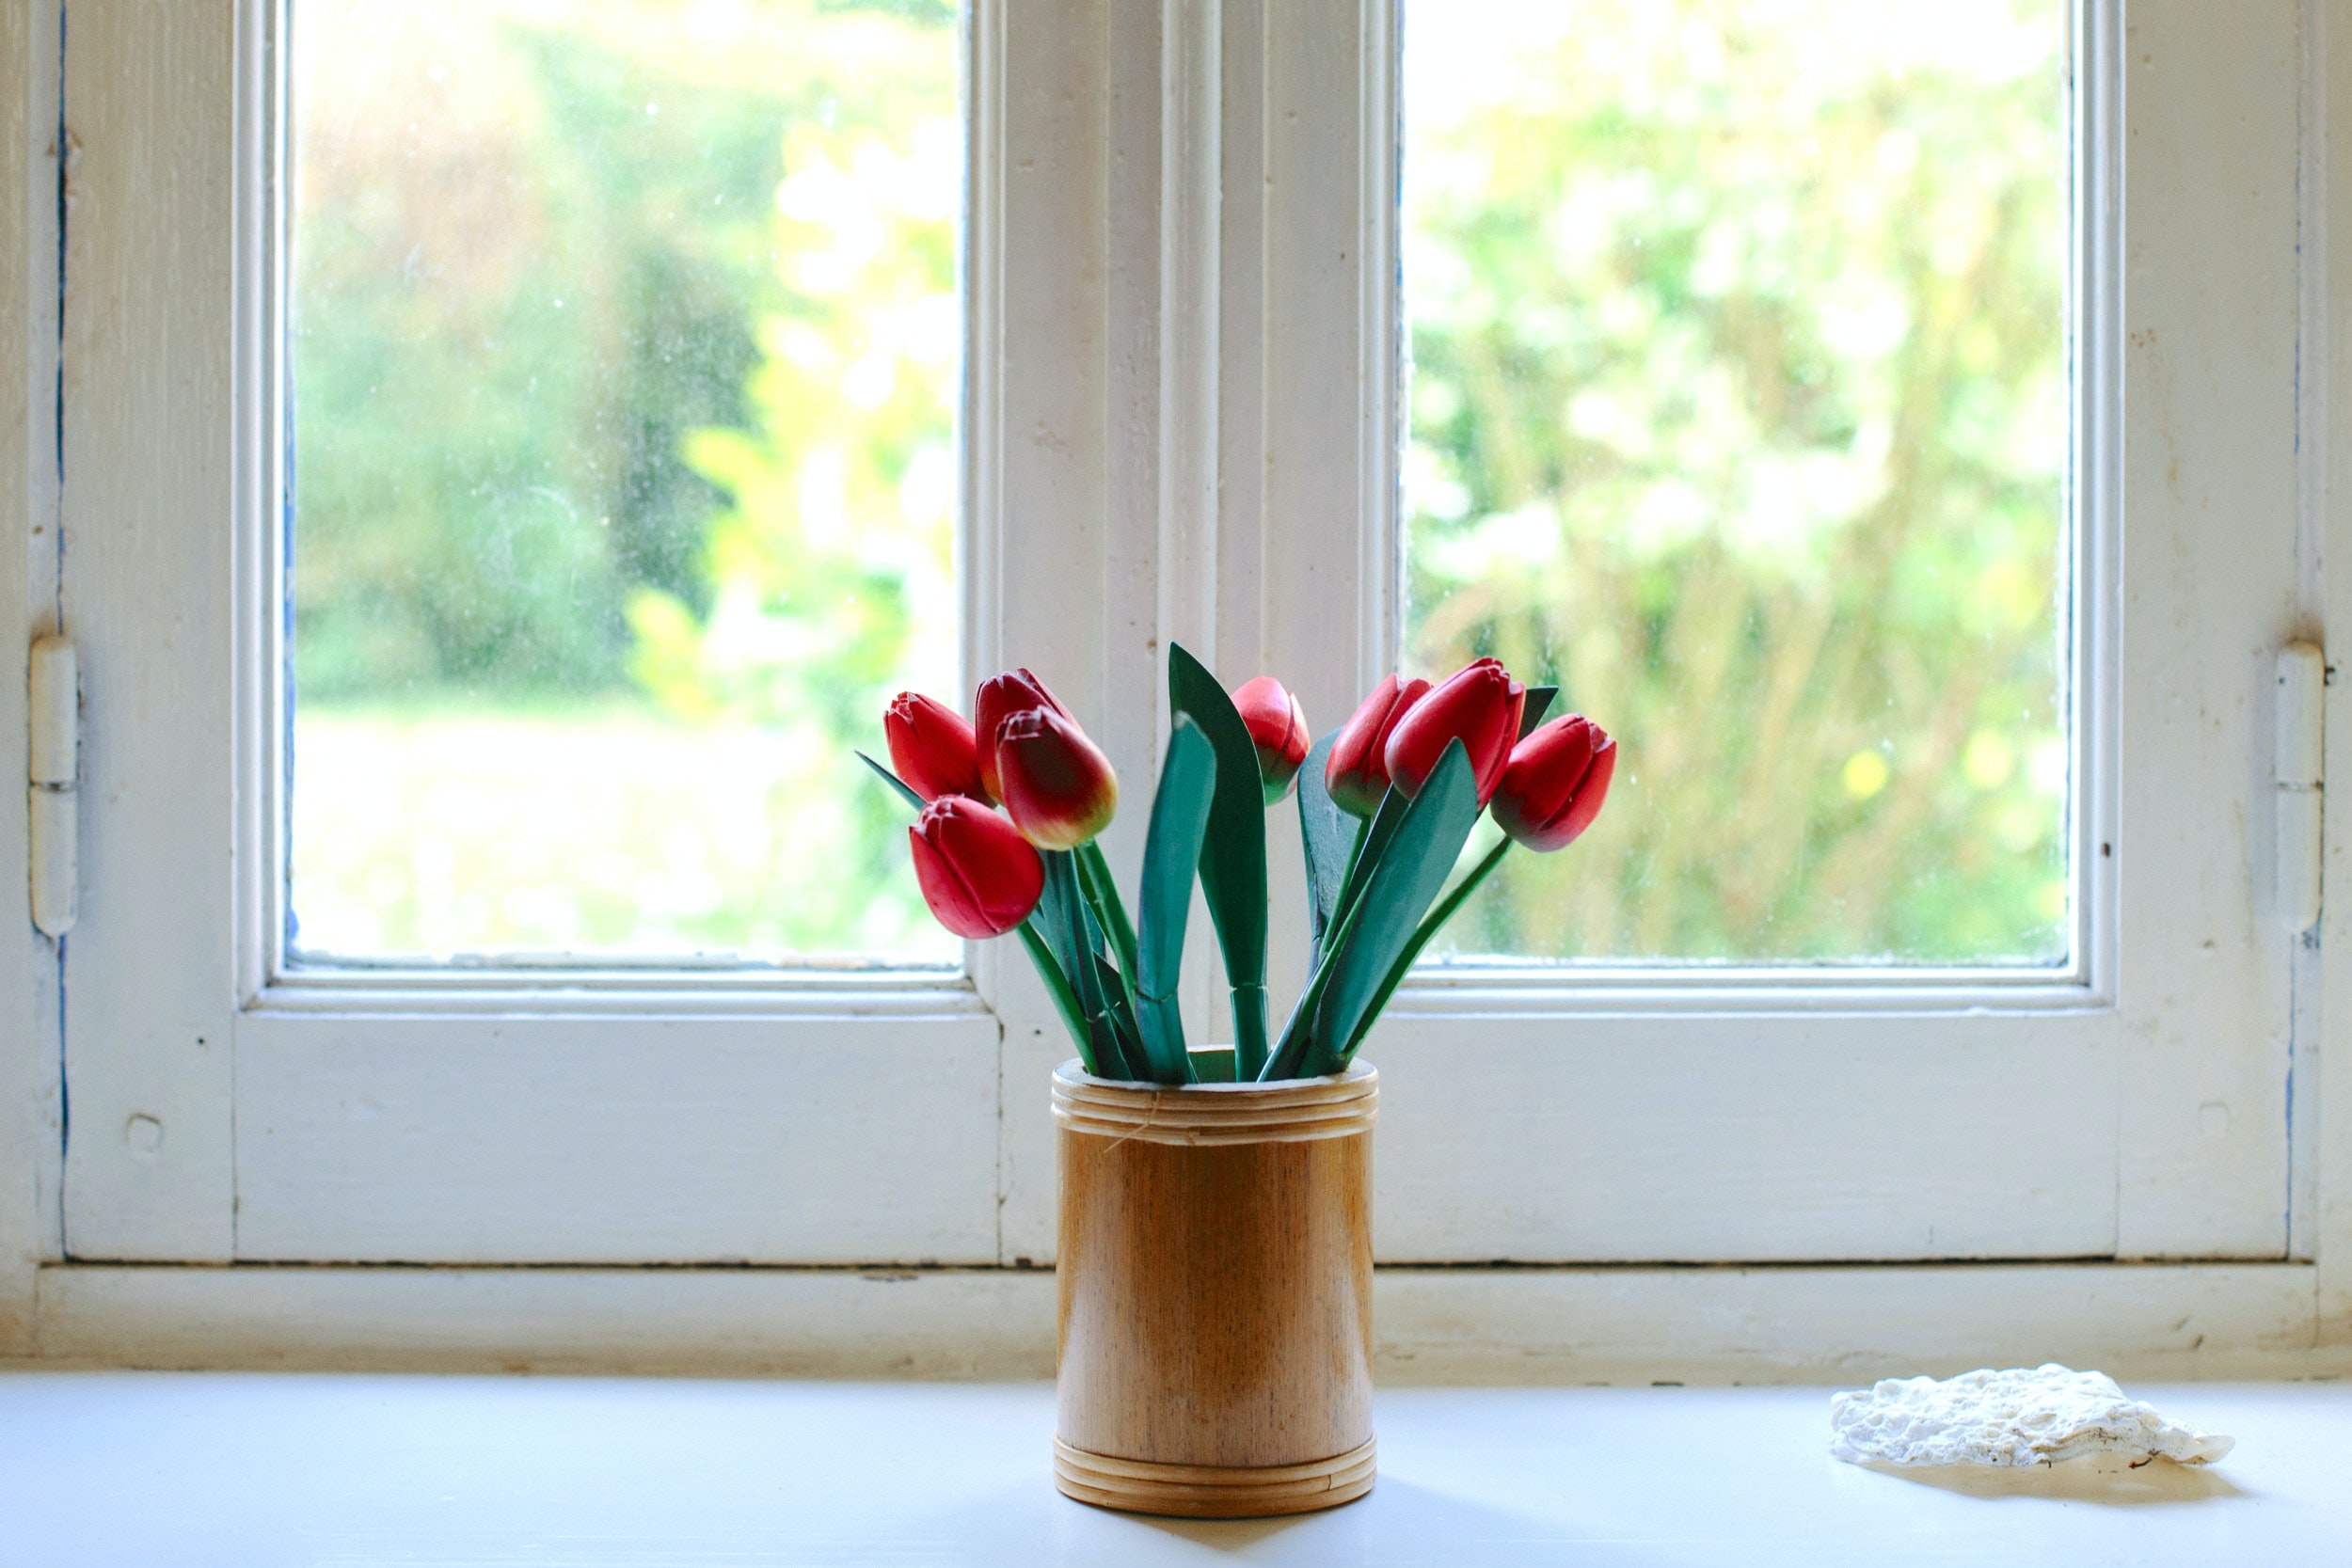 A wooden vase of red tulips in front of a white window.